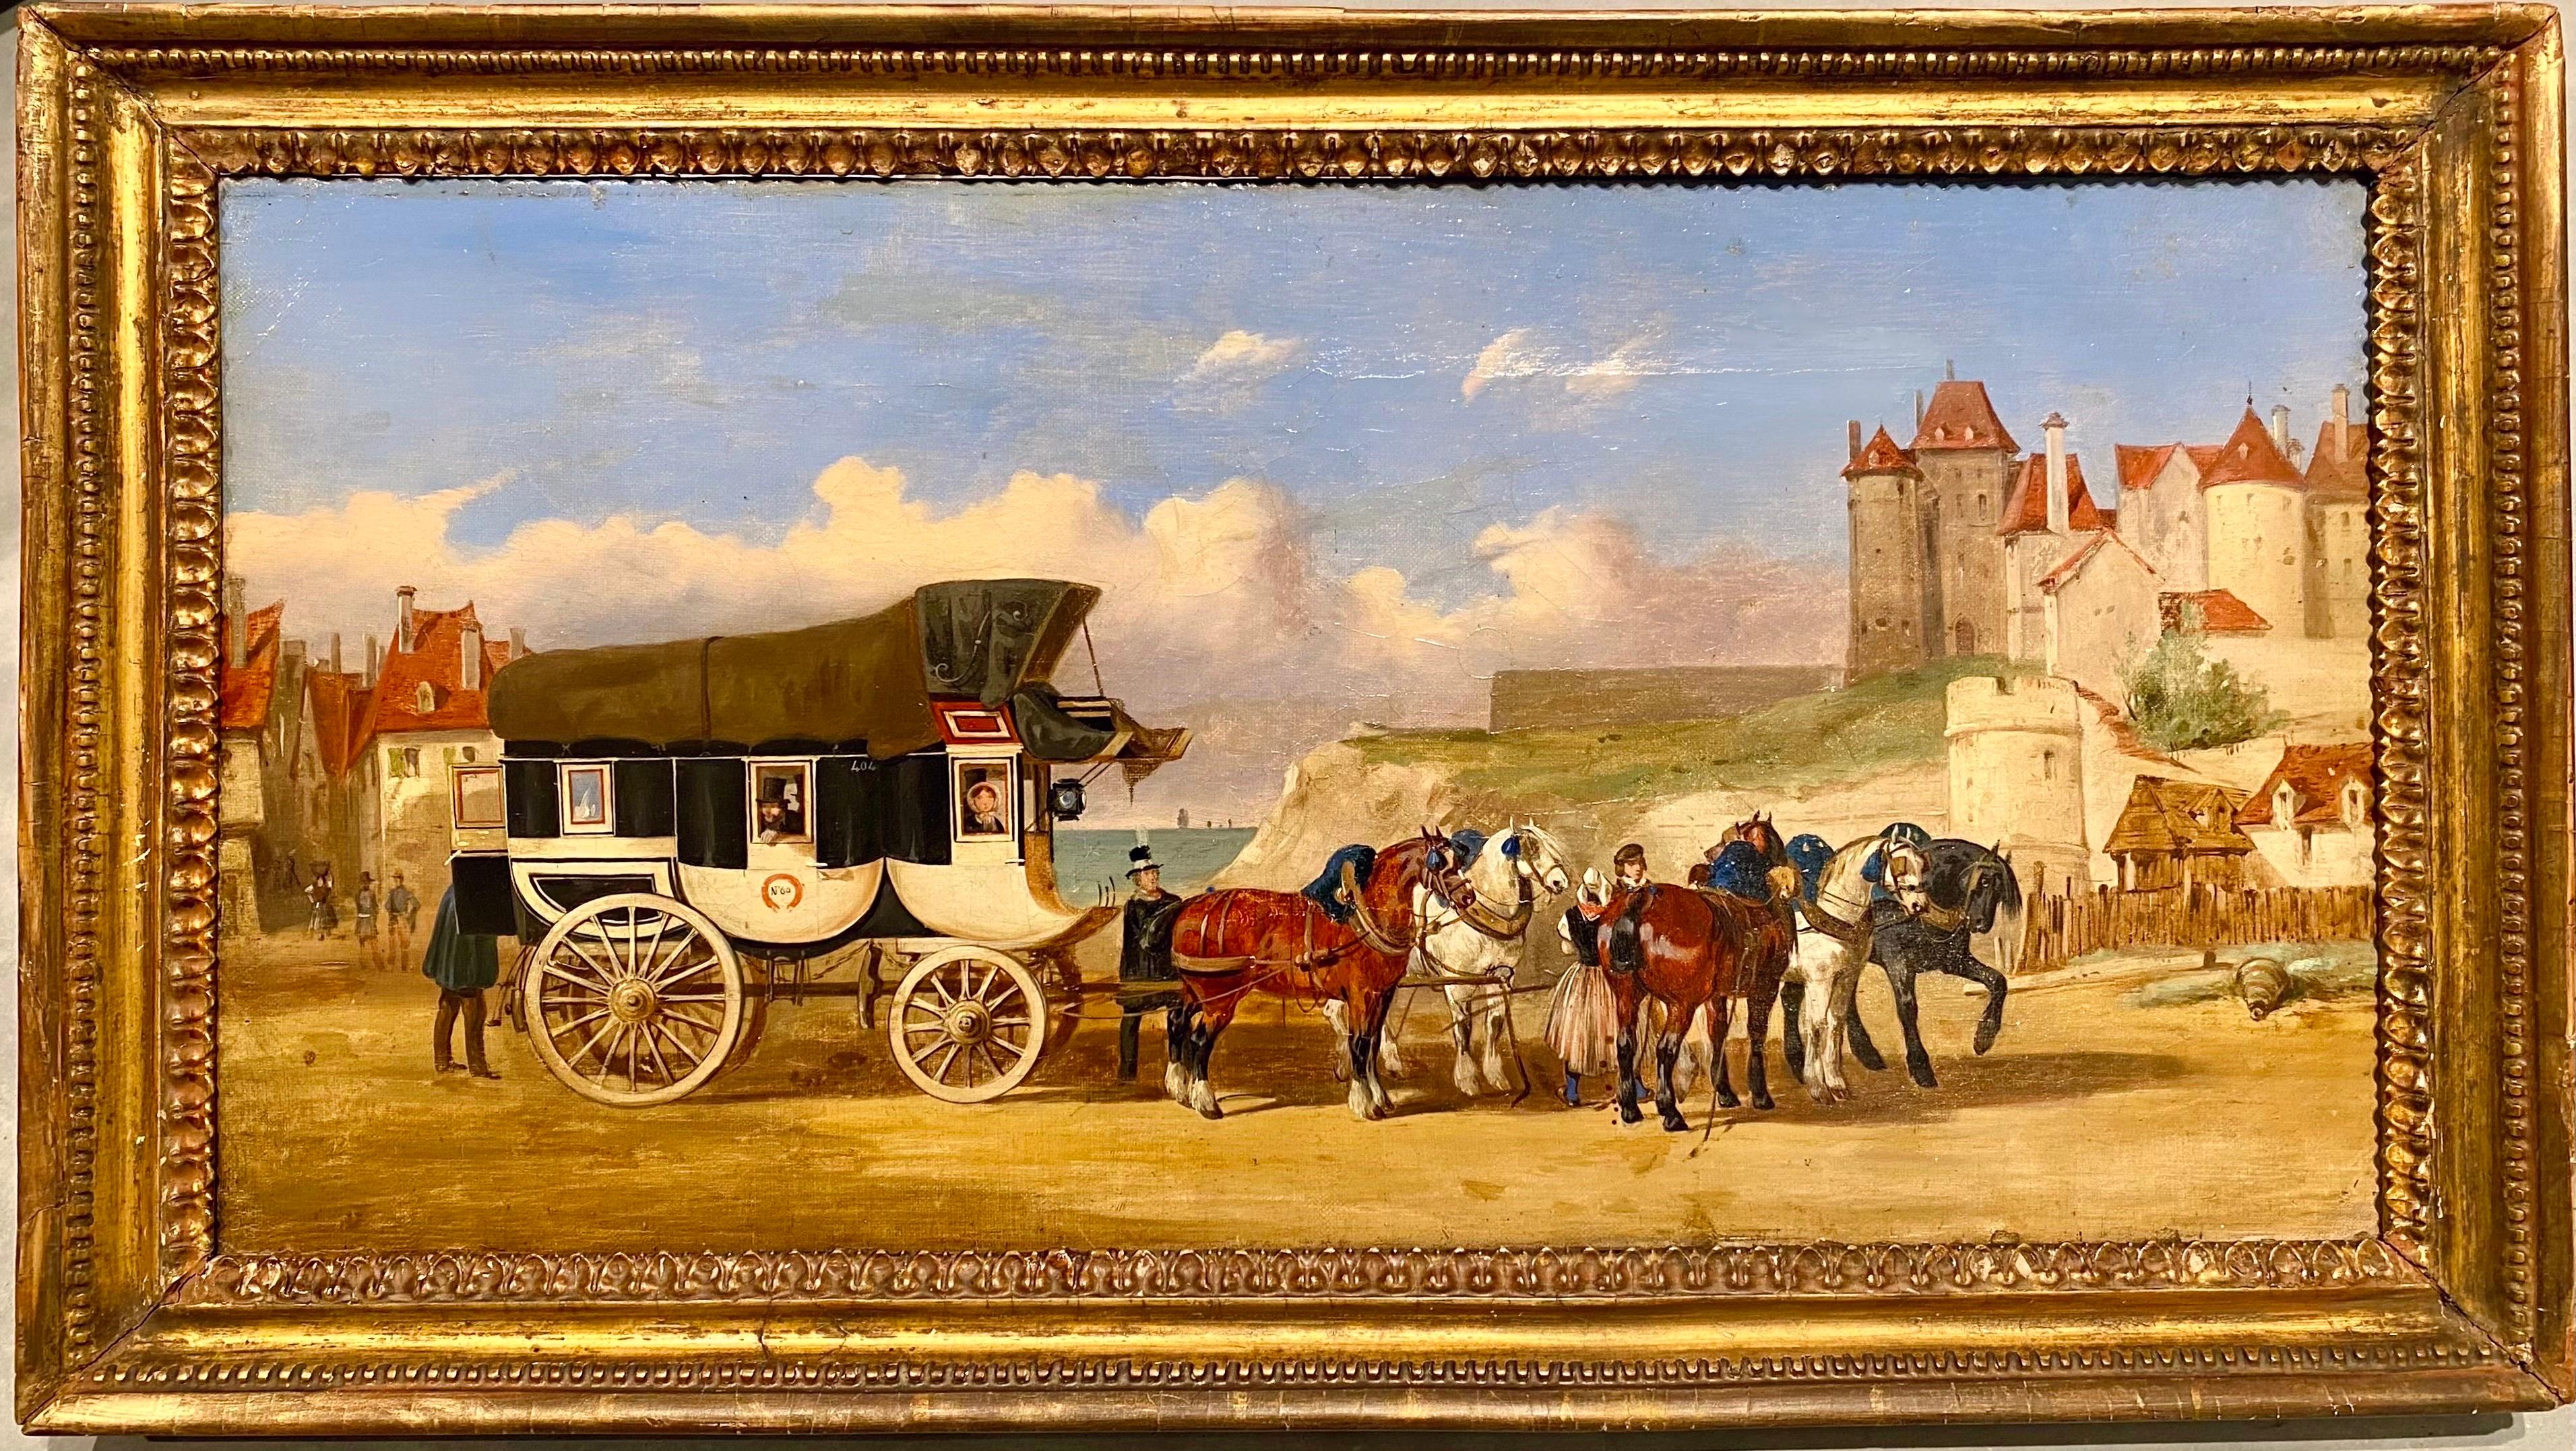 Unknown Figurative Painting - 19th century French romantic painting - Le chateau de Dieppe - horse carriage 